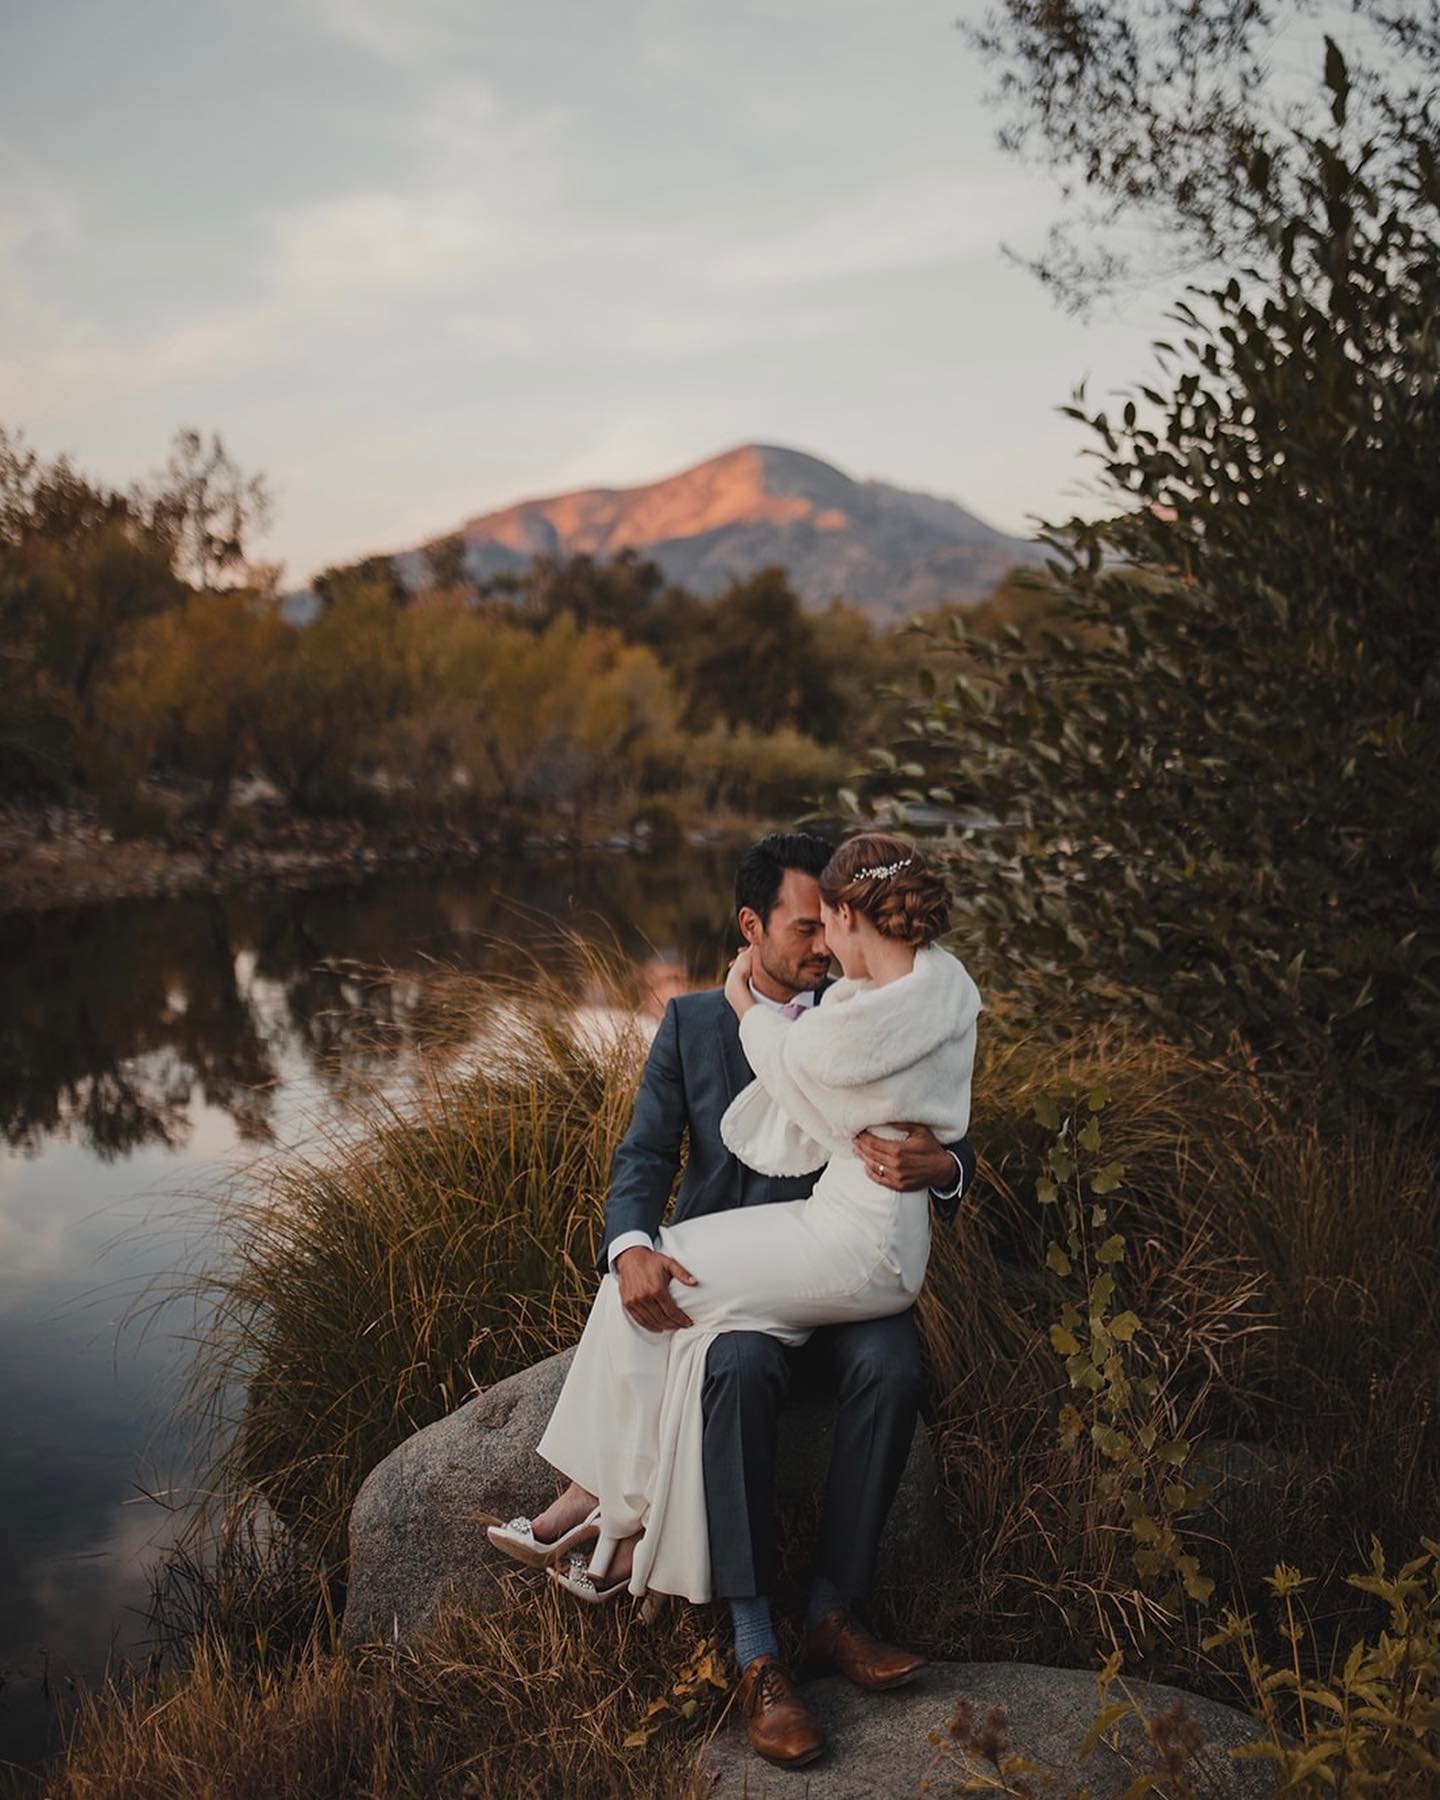 An intimate river side wedding with Rebecca &amp; Aaron, and a handful of loved ones 🤍